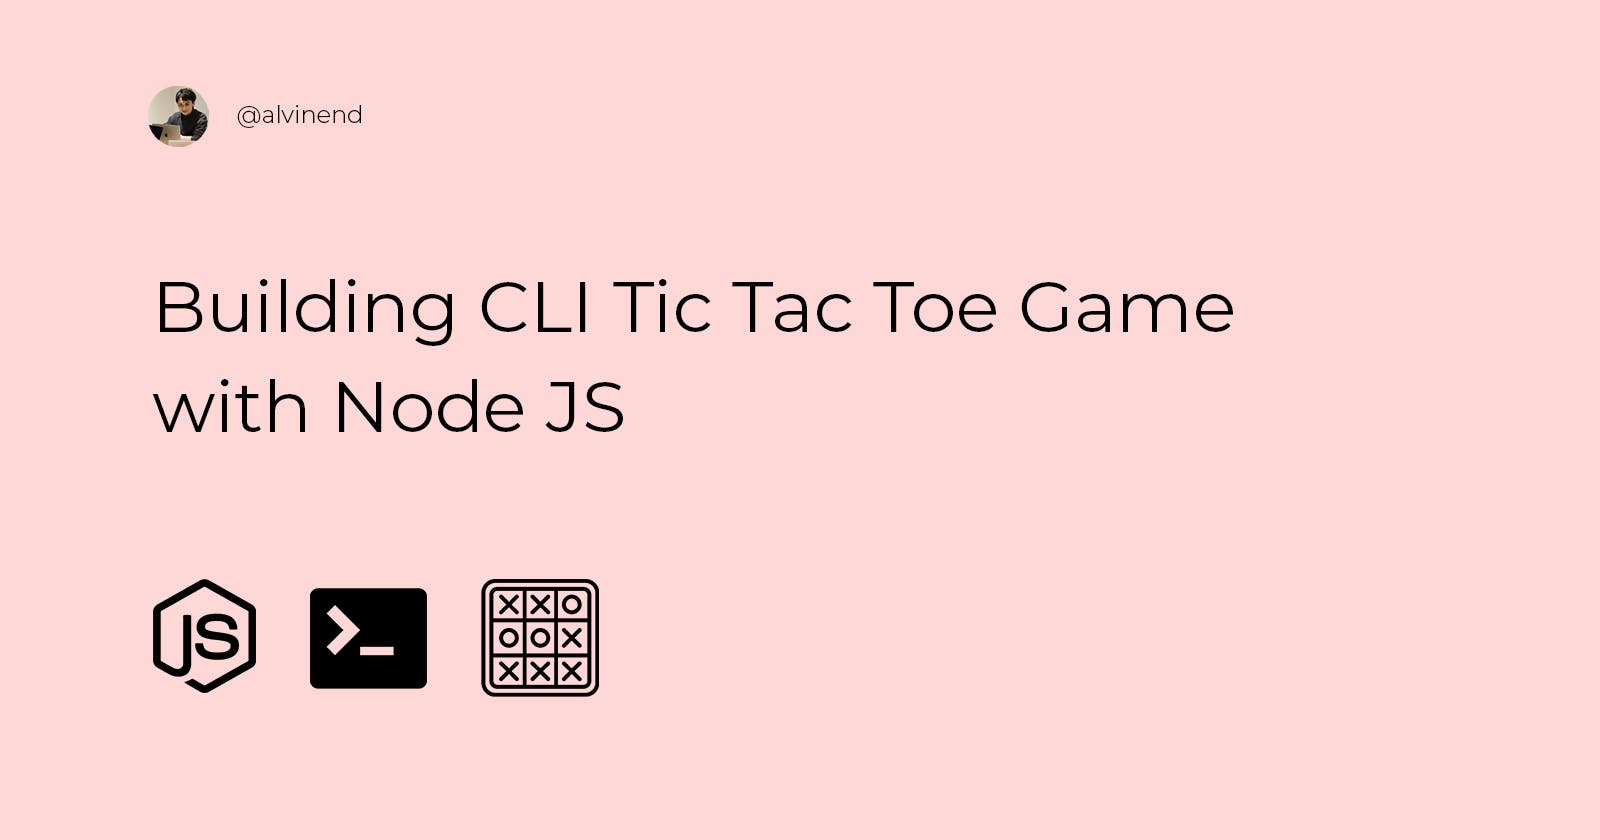 Building CLI Tic Tac Toe Game with Node JS